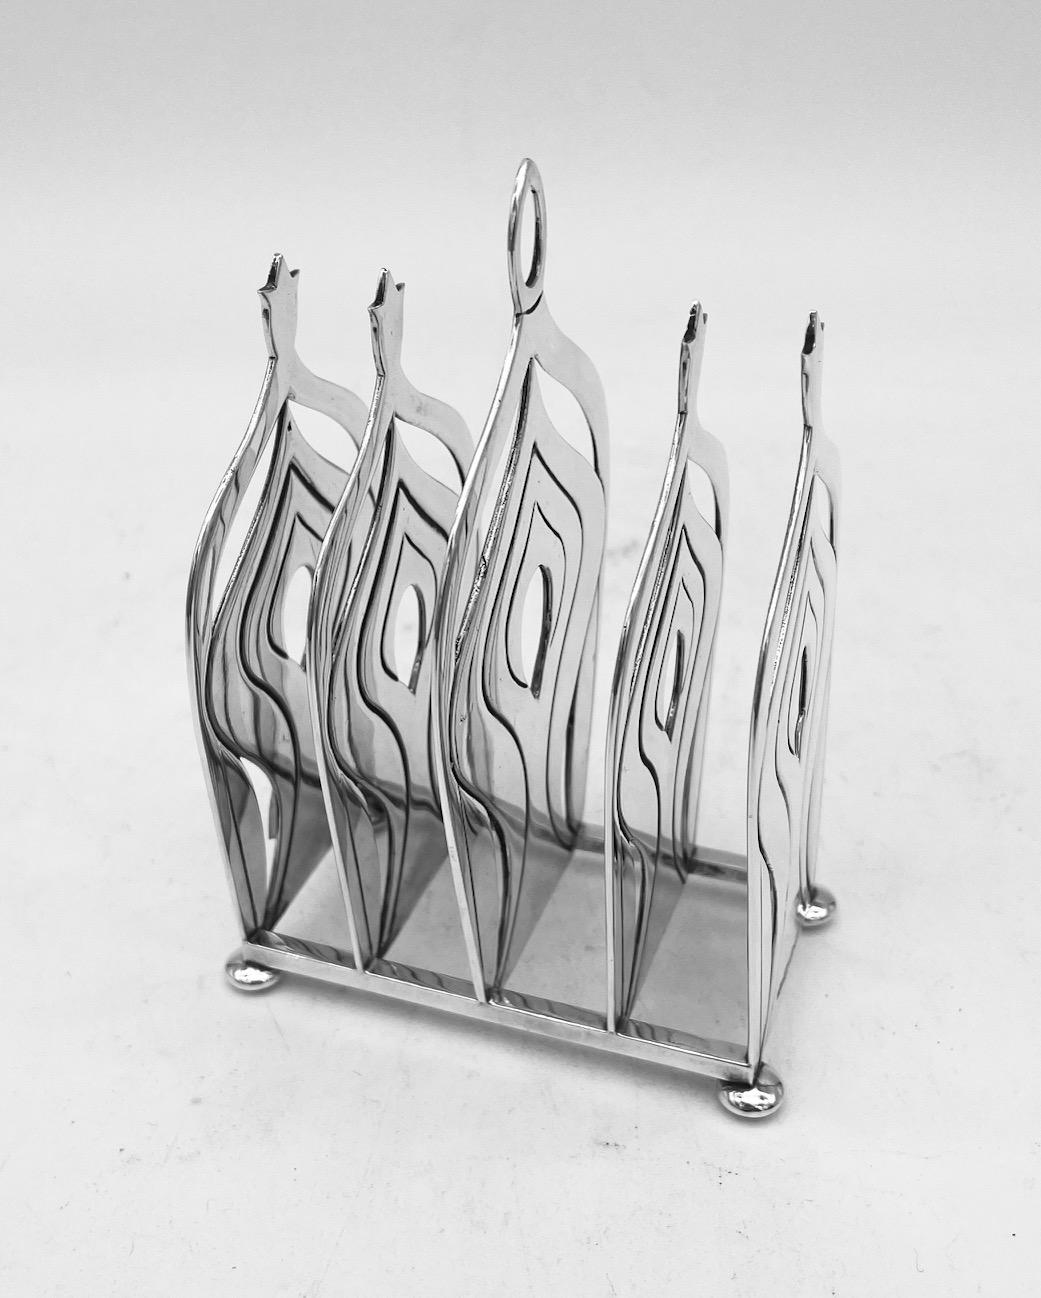 A beautifully designed sterling silver letter or toast rack, made by the renowned silversmith George Grant McDonald, and hallmarked for London 2007.
This lovely piece is particularly heavy weighing 323g, and will make a fine addition to any